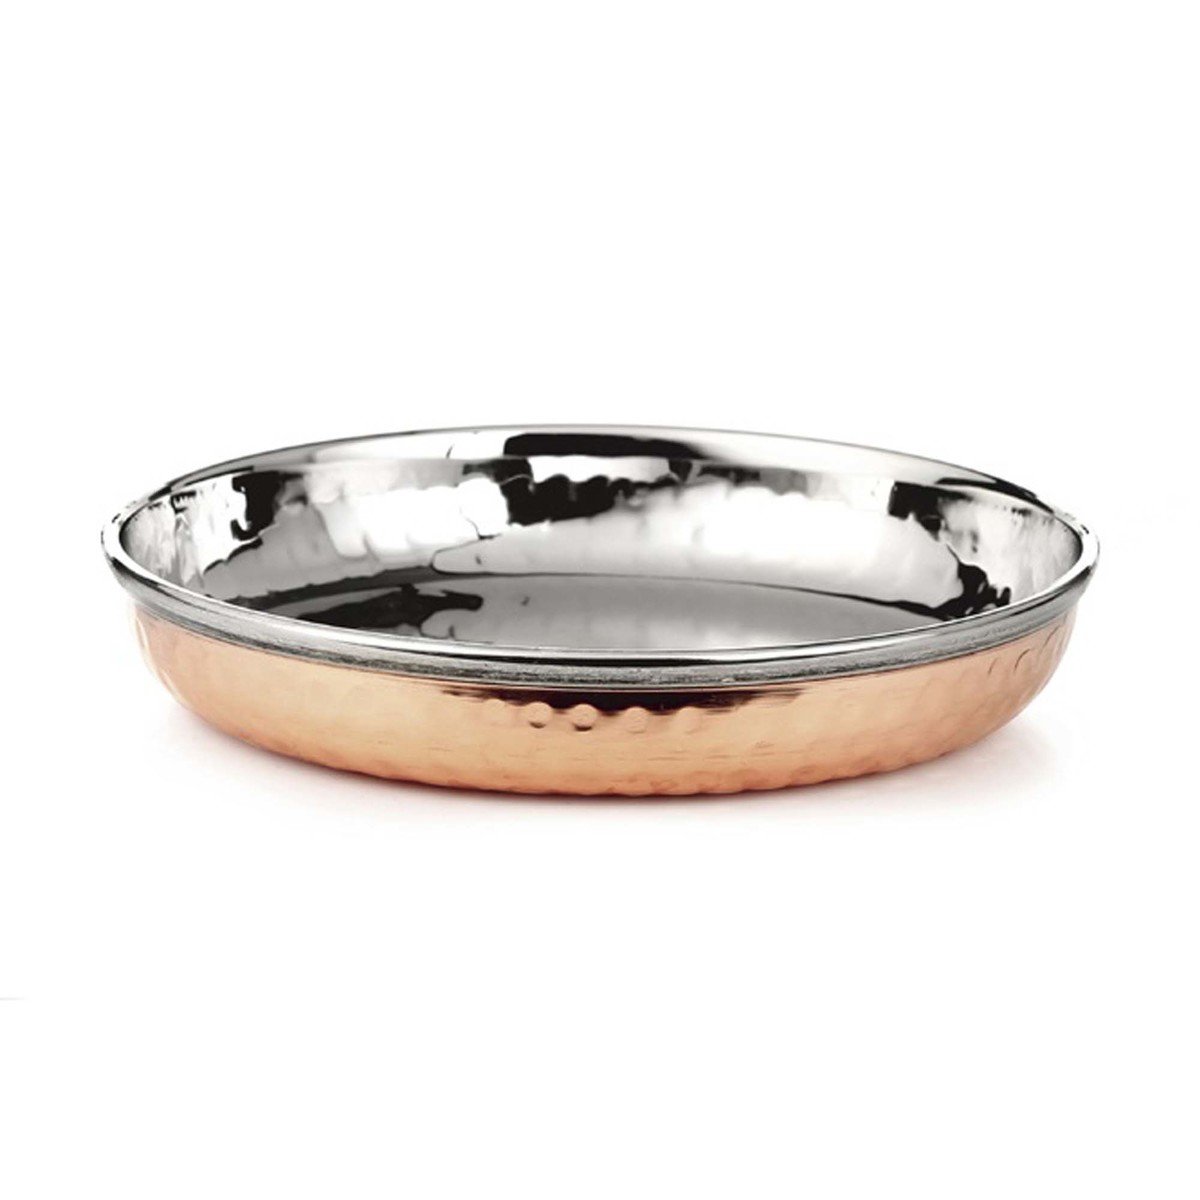 Chefline Double Wall Copper Pudding Bowl 85118-DW